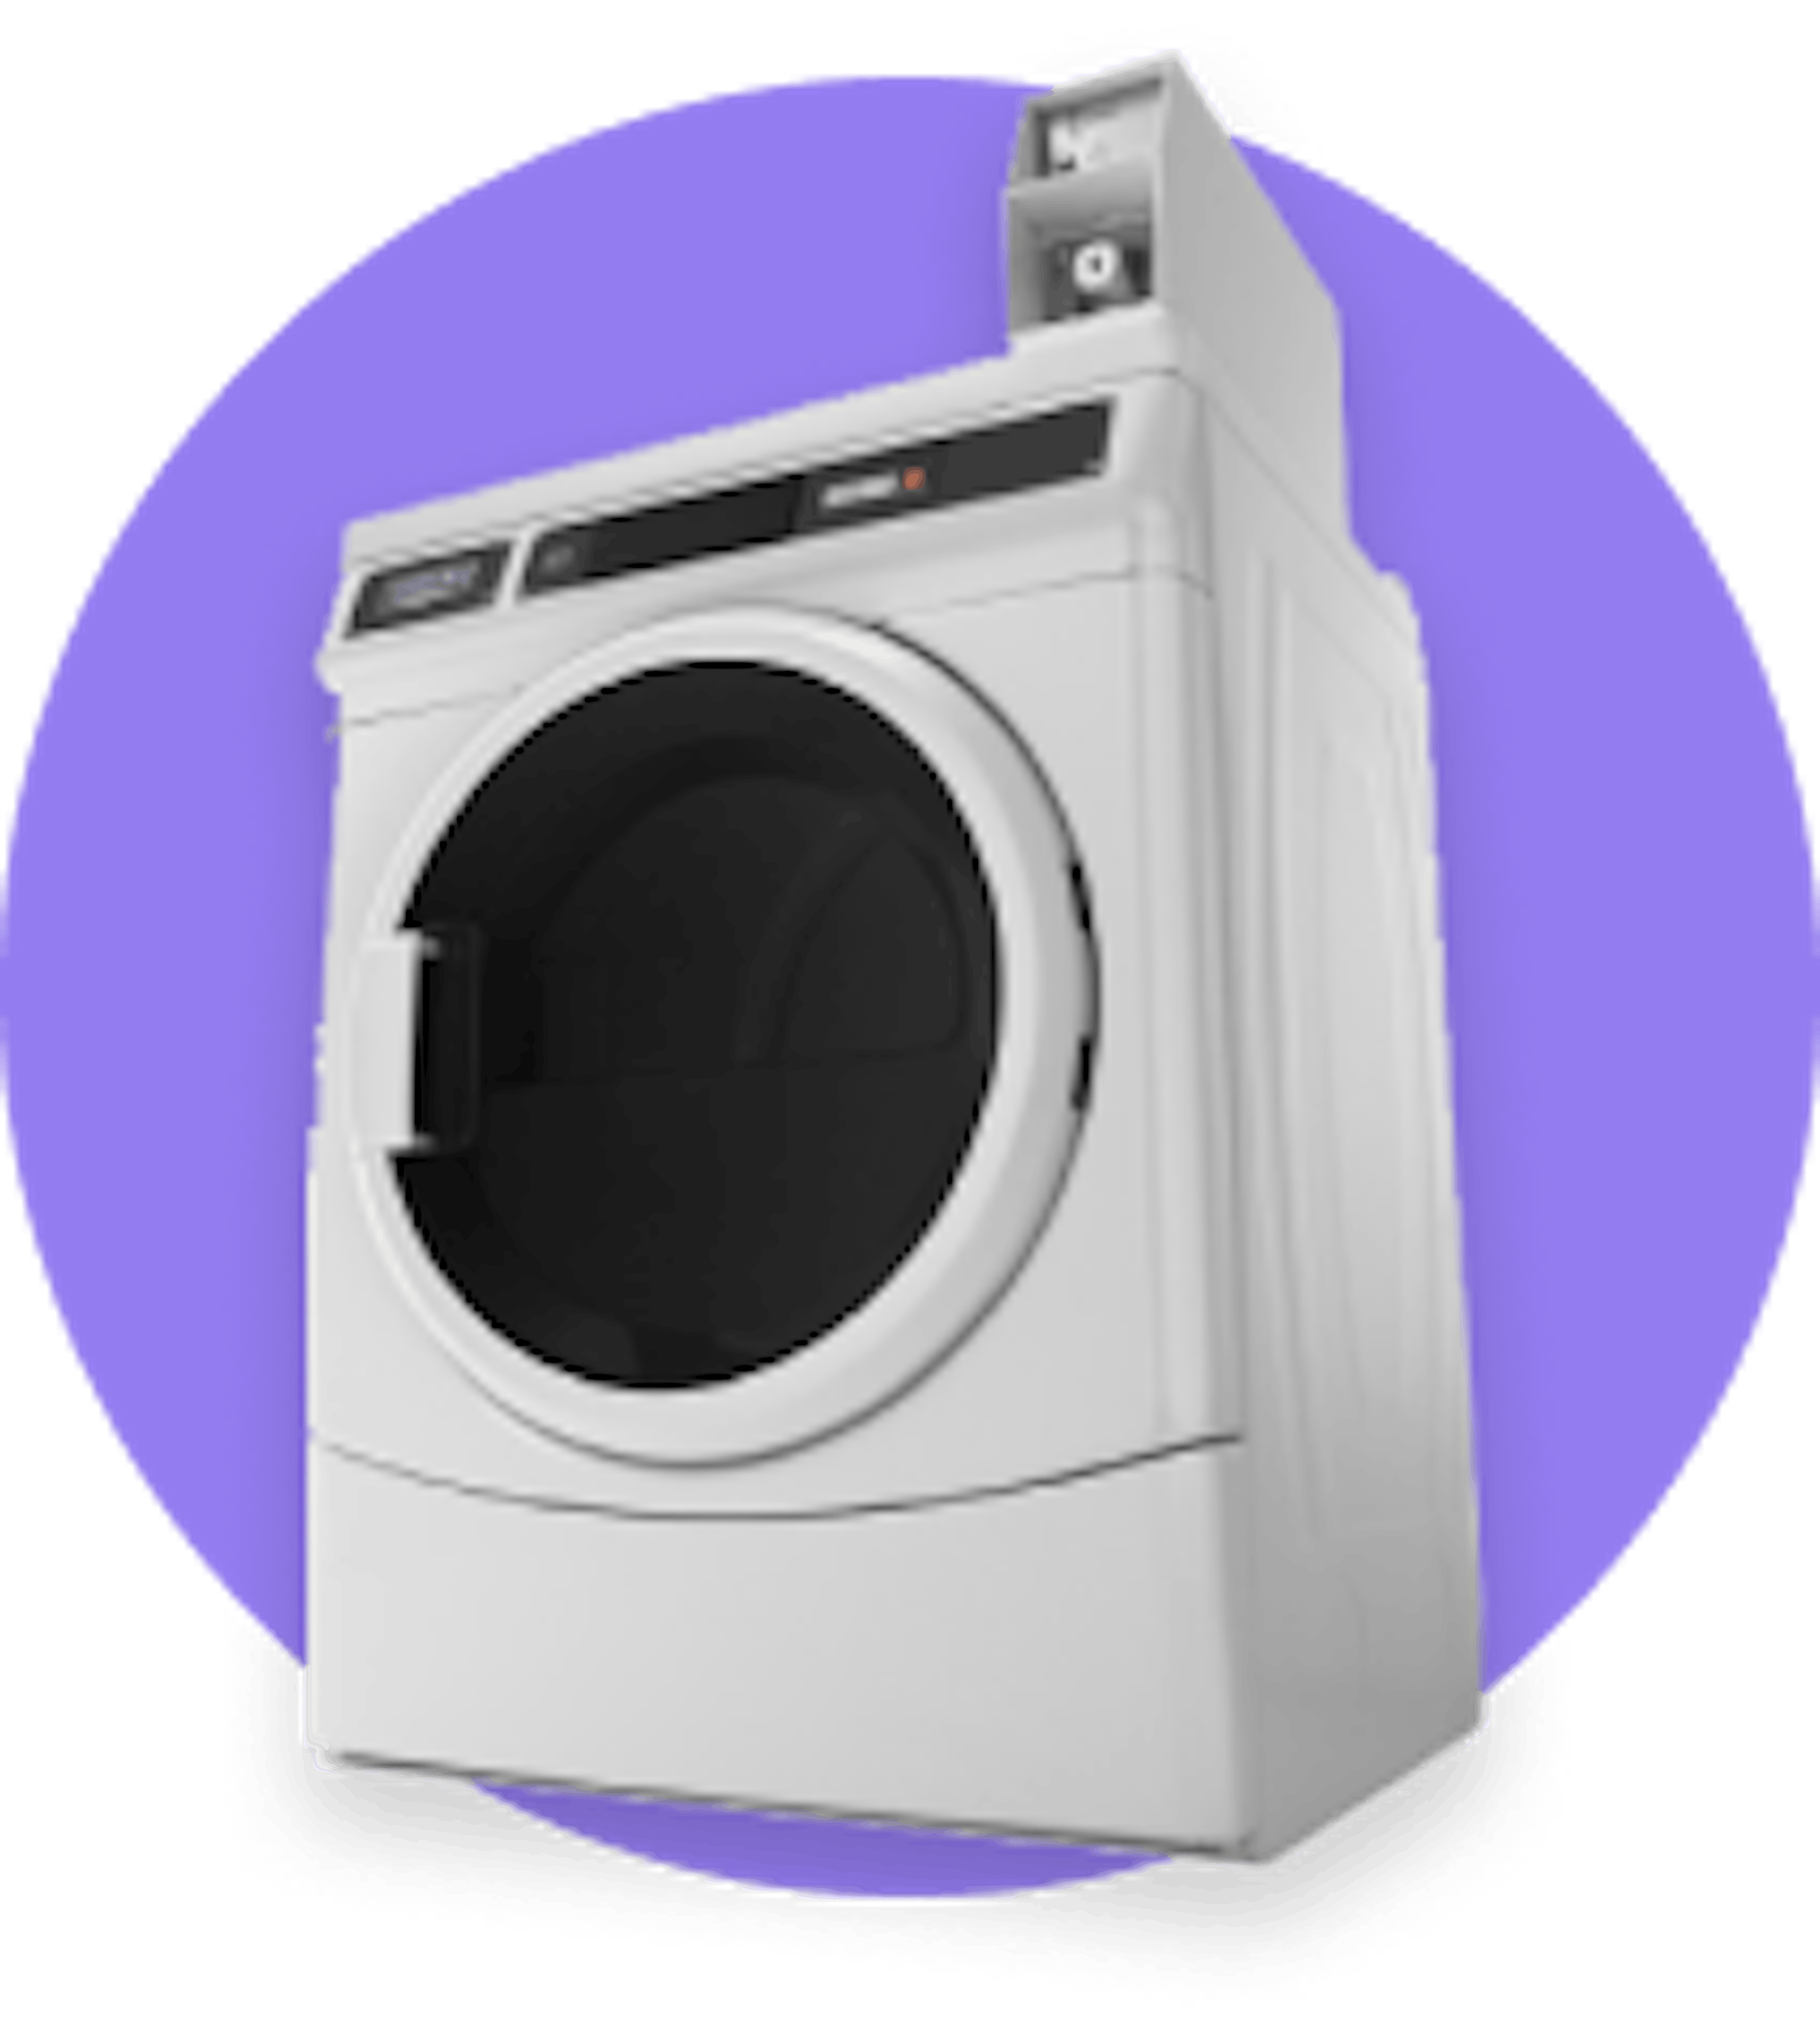 Icon with Maytag coin-op machine, on violet background